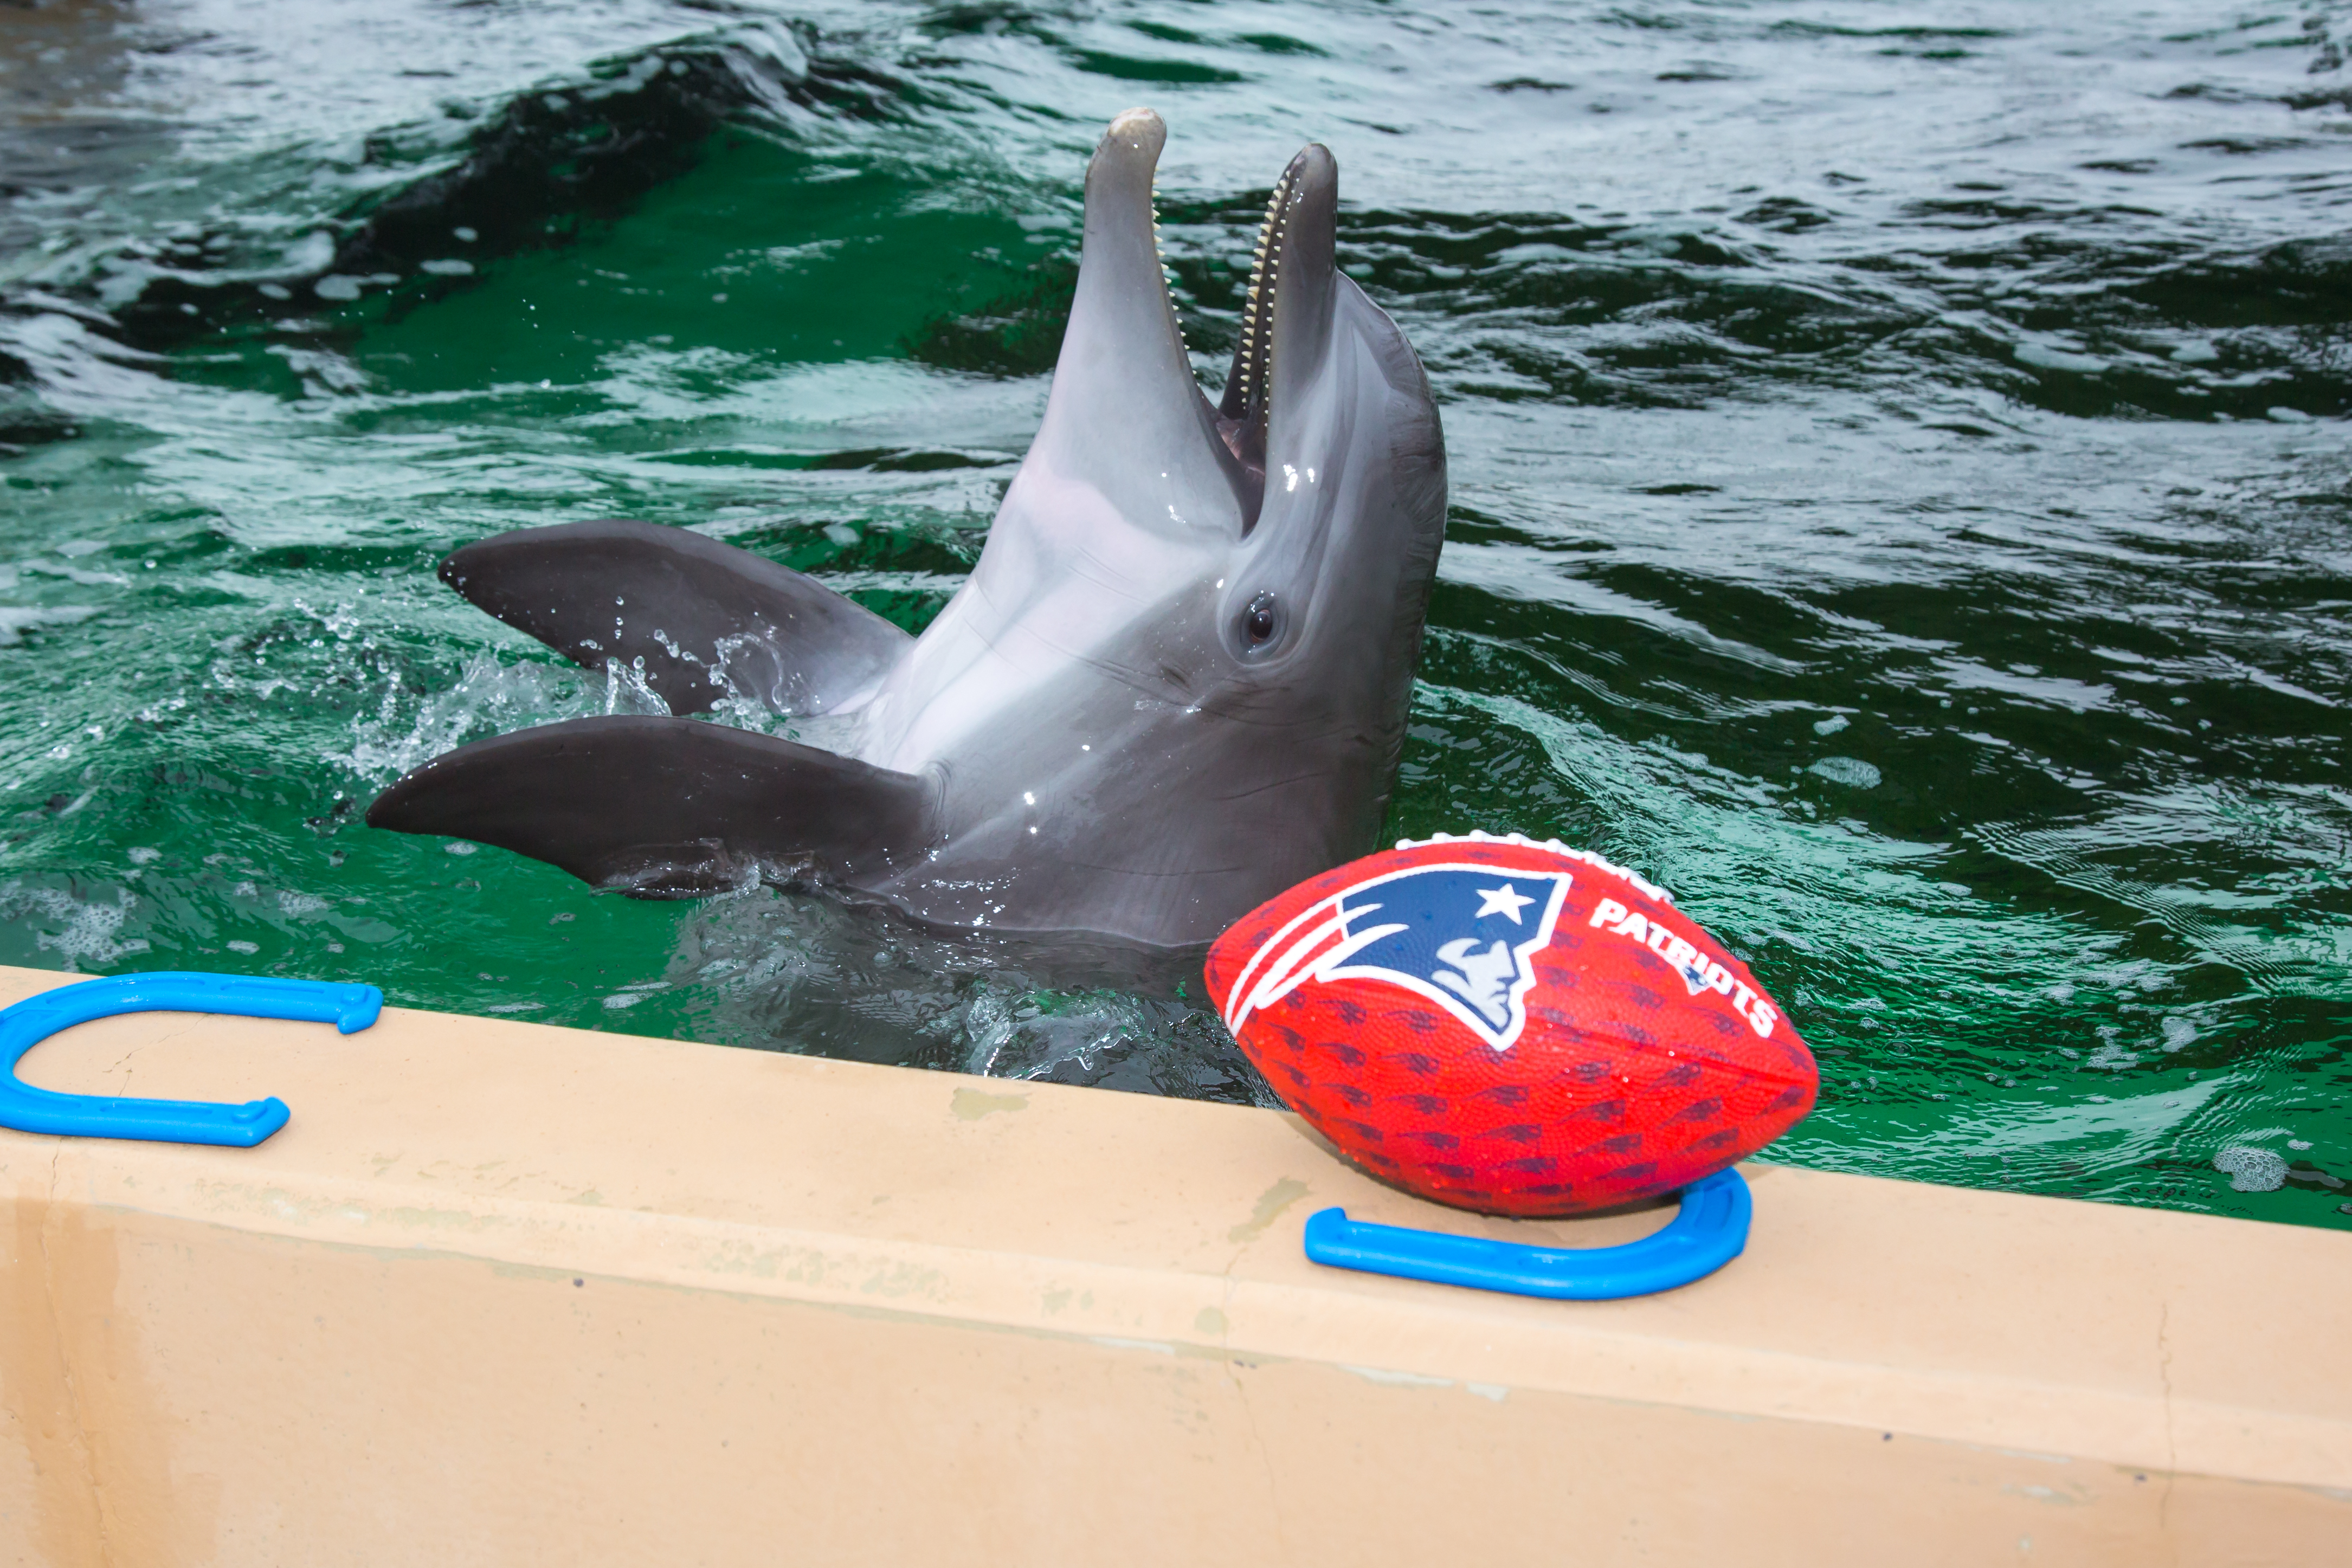 Nicholas the Dolphin picks Chiefs to win Super Bowl LV - Tampa News Force